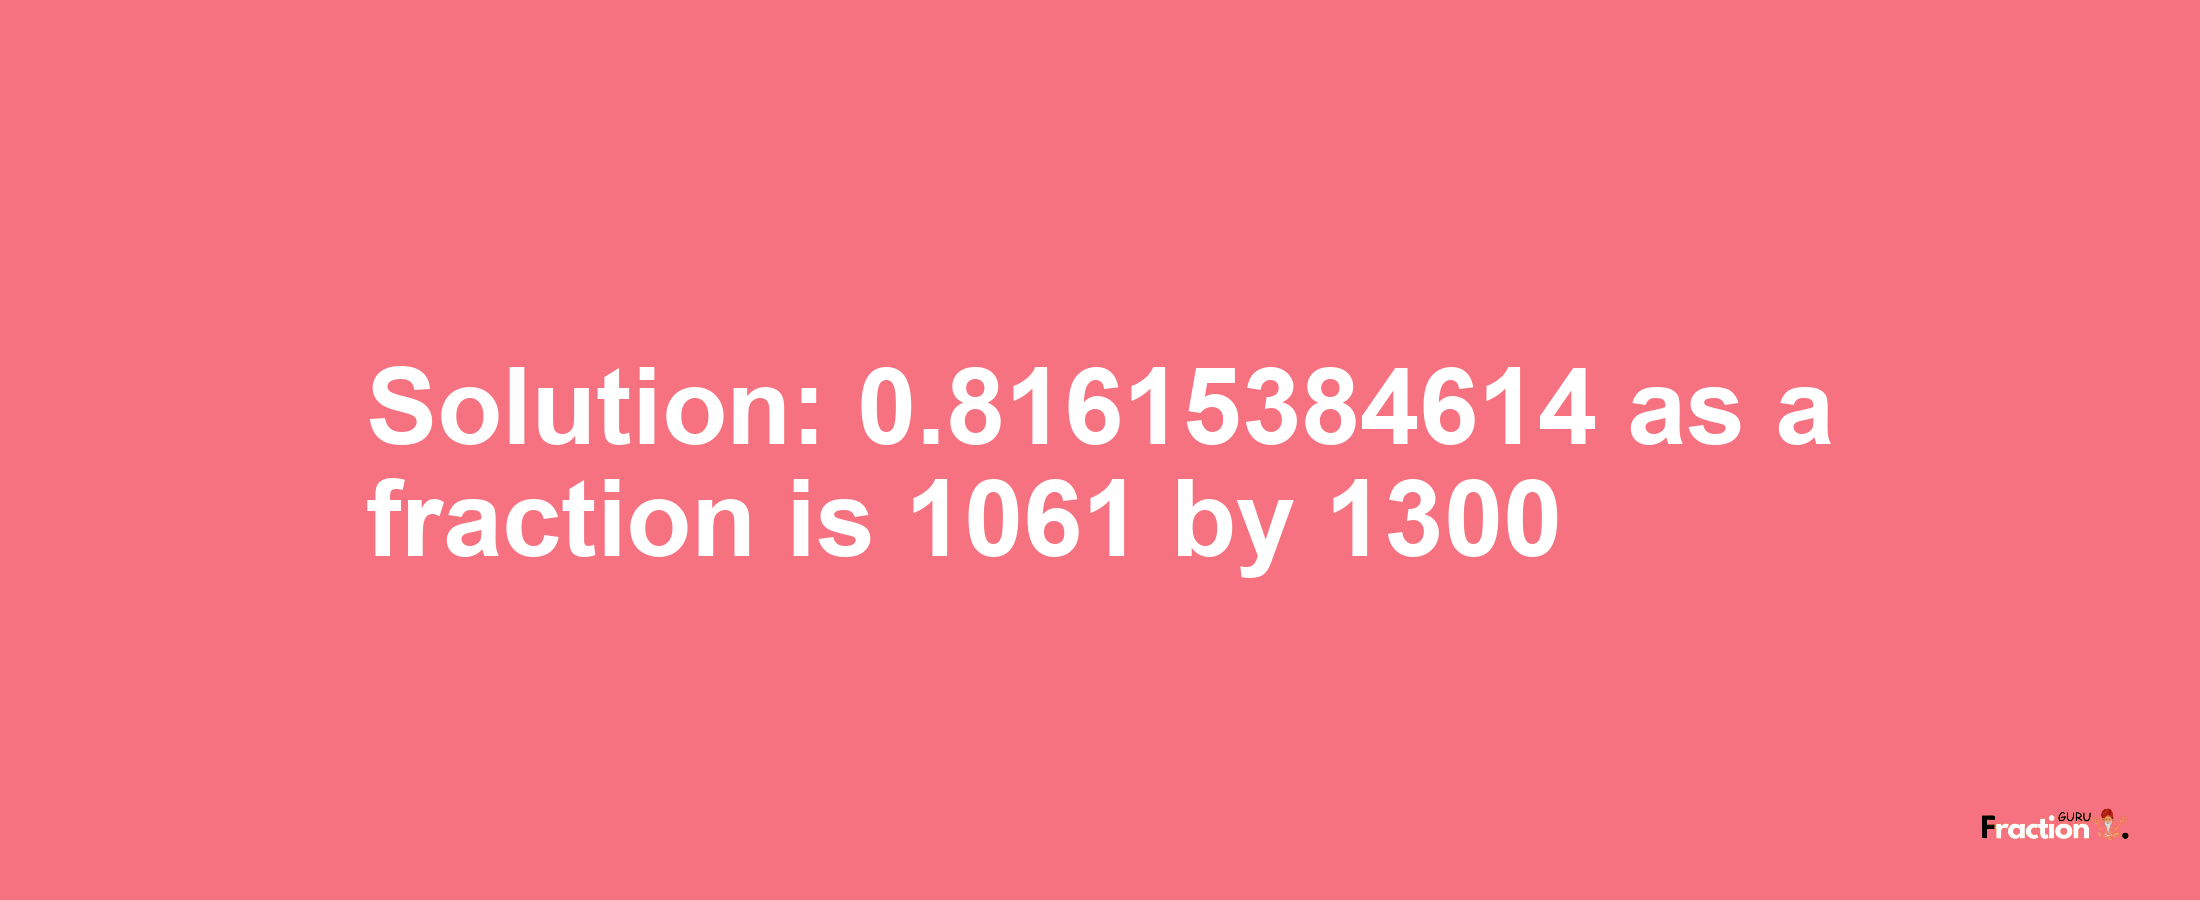 Solution:0.81615384614 as a fraction is 1061/1300